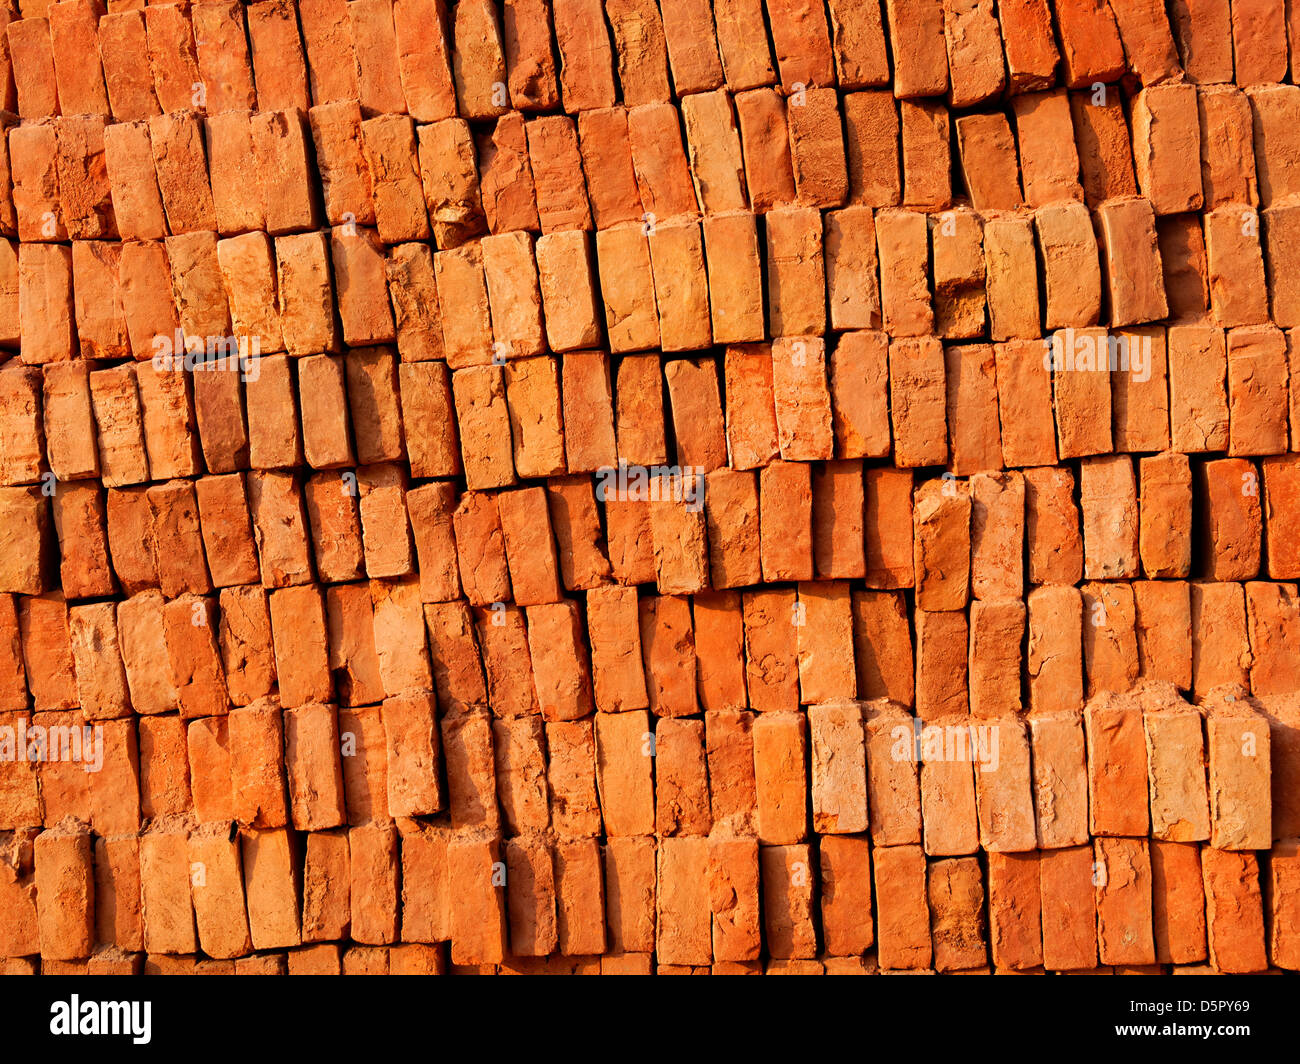 Brick stack, construction material background Stock Photo